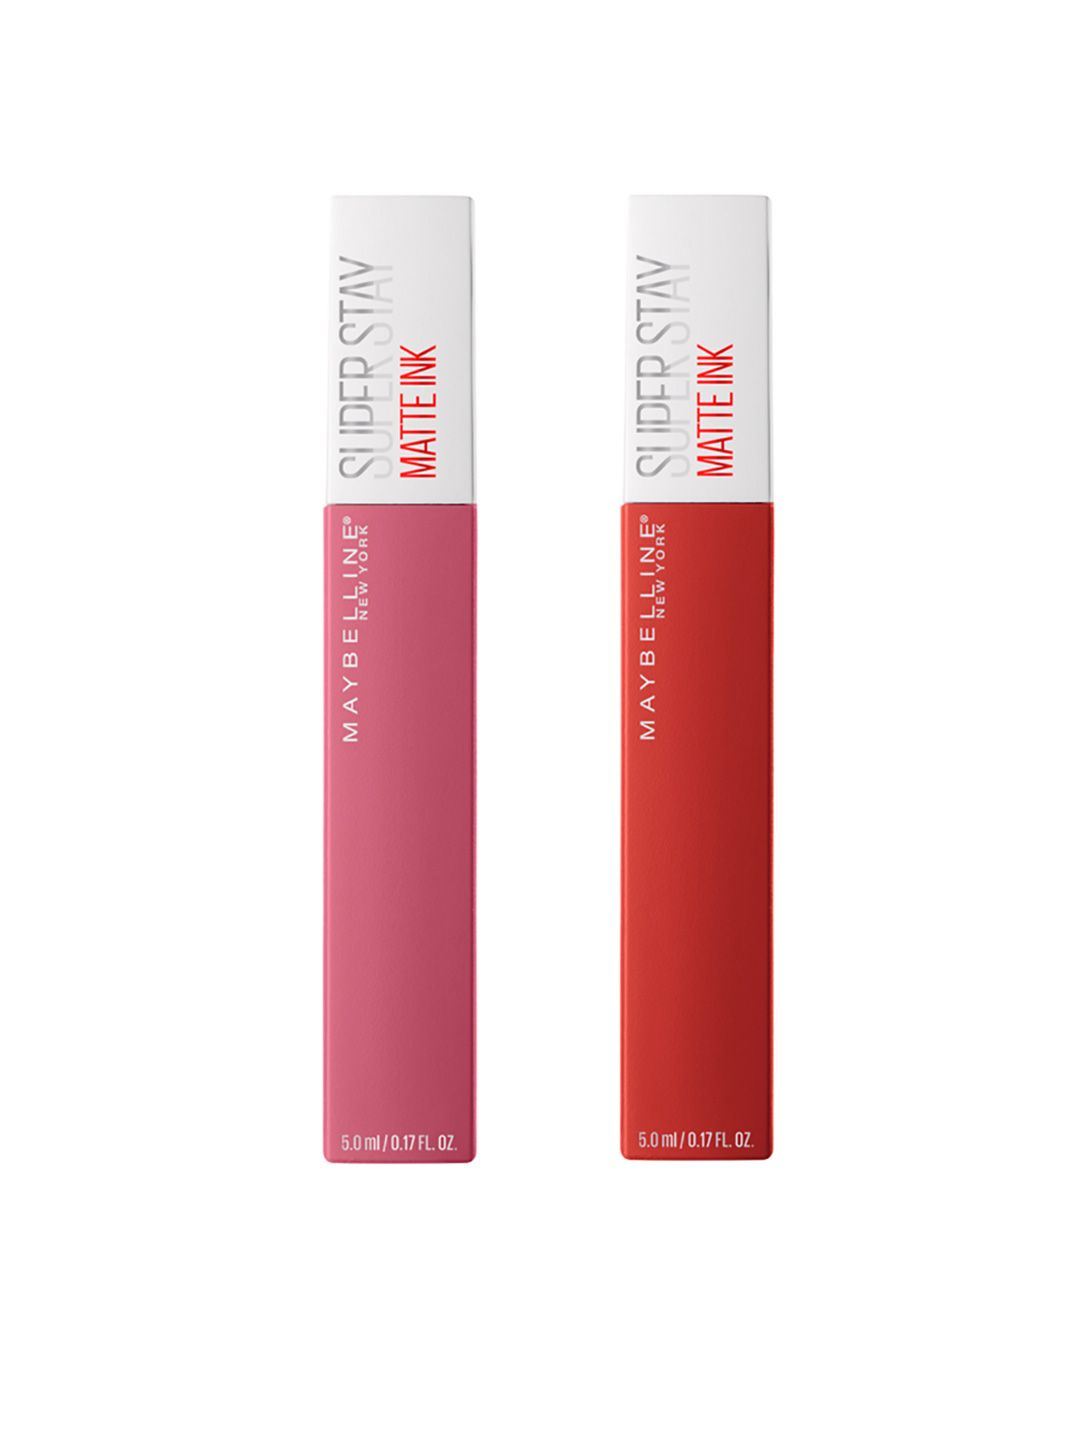 Maybelline New York Set of 2 Super Stay Matte Ink Liquid Lipstick Price in India